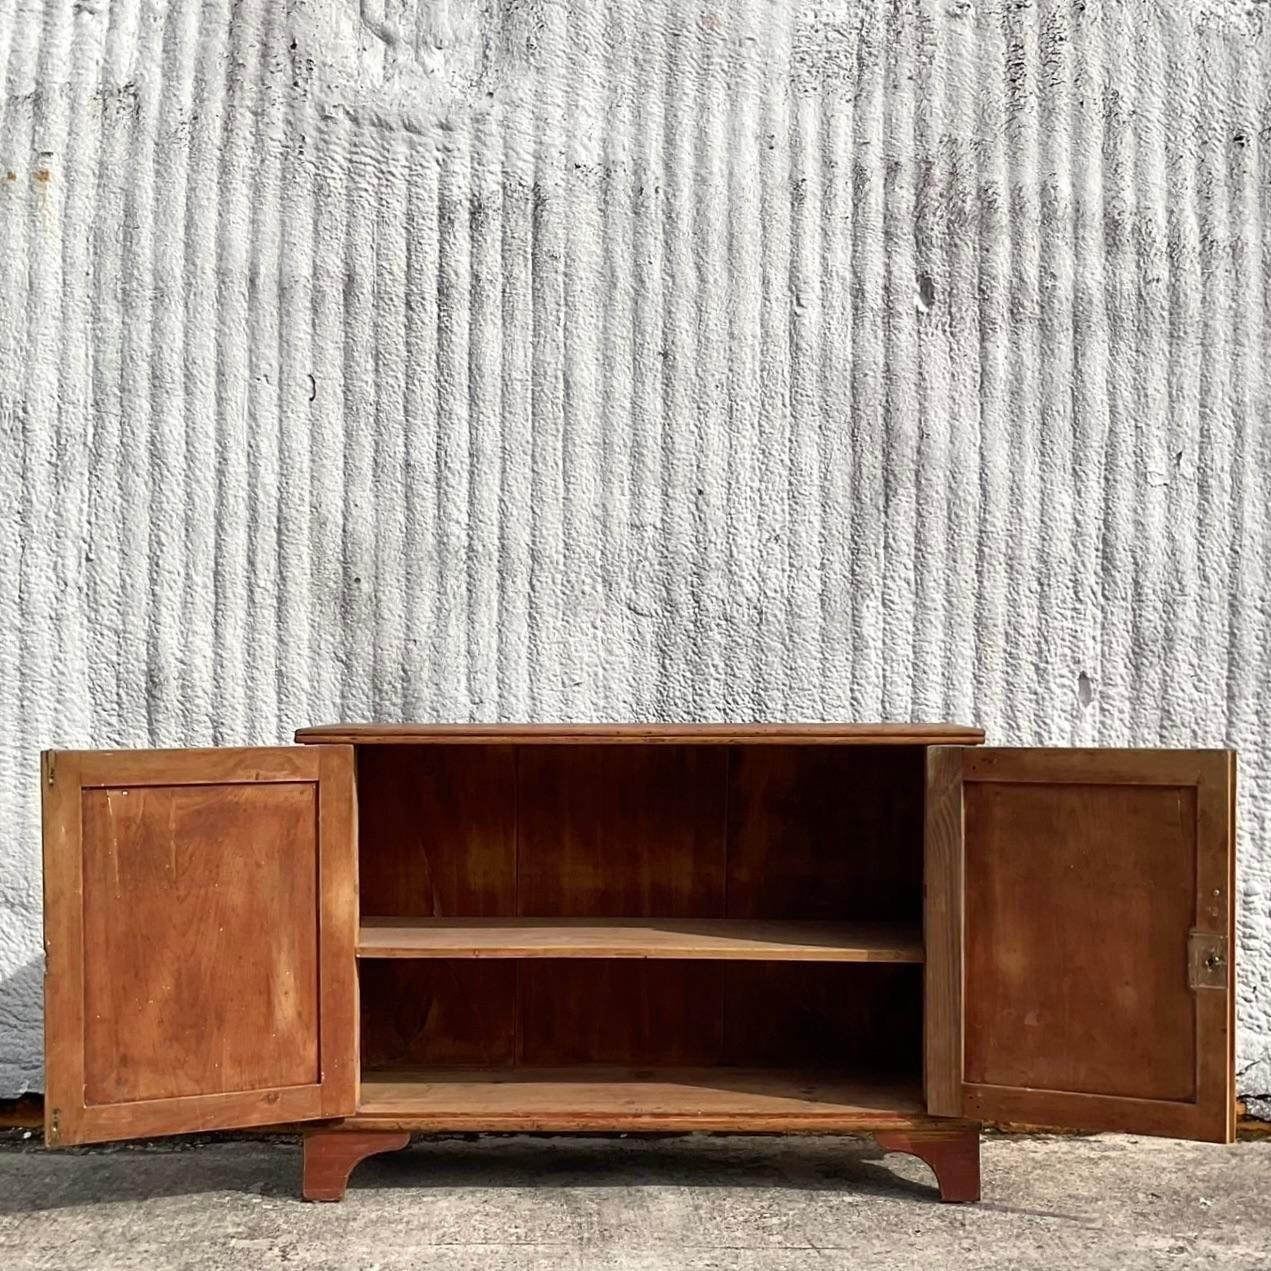 A fantastic vintage rustic sideboard. Chic turned wood detail and a great all over patina from time. Lots of great storage below. Acquired from a Palm Beach estate.